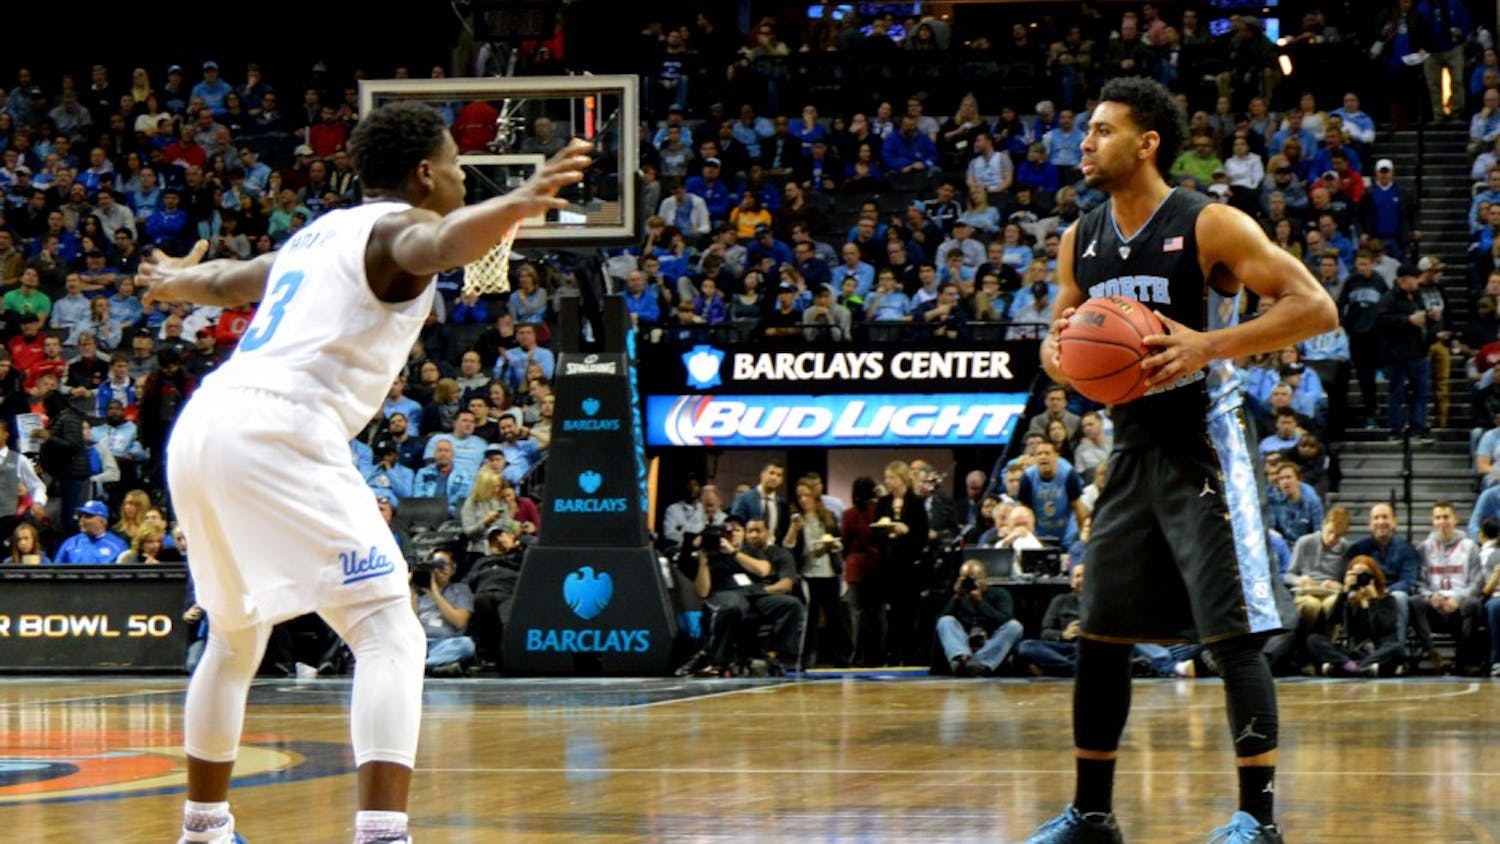 Sophomore guard&nbsp;Joel Berry had a career-high 17 points in UNC's 89-76 win over UCLA.&nbsp;